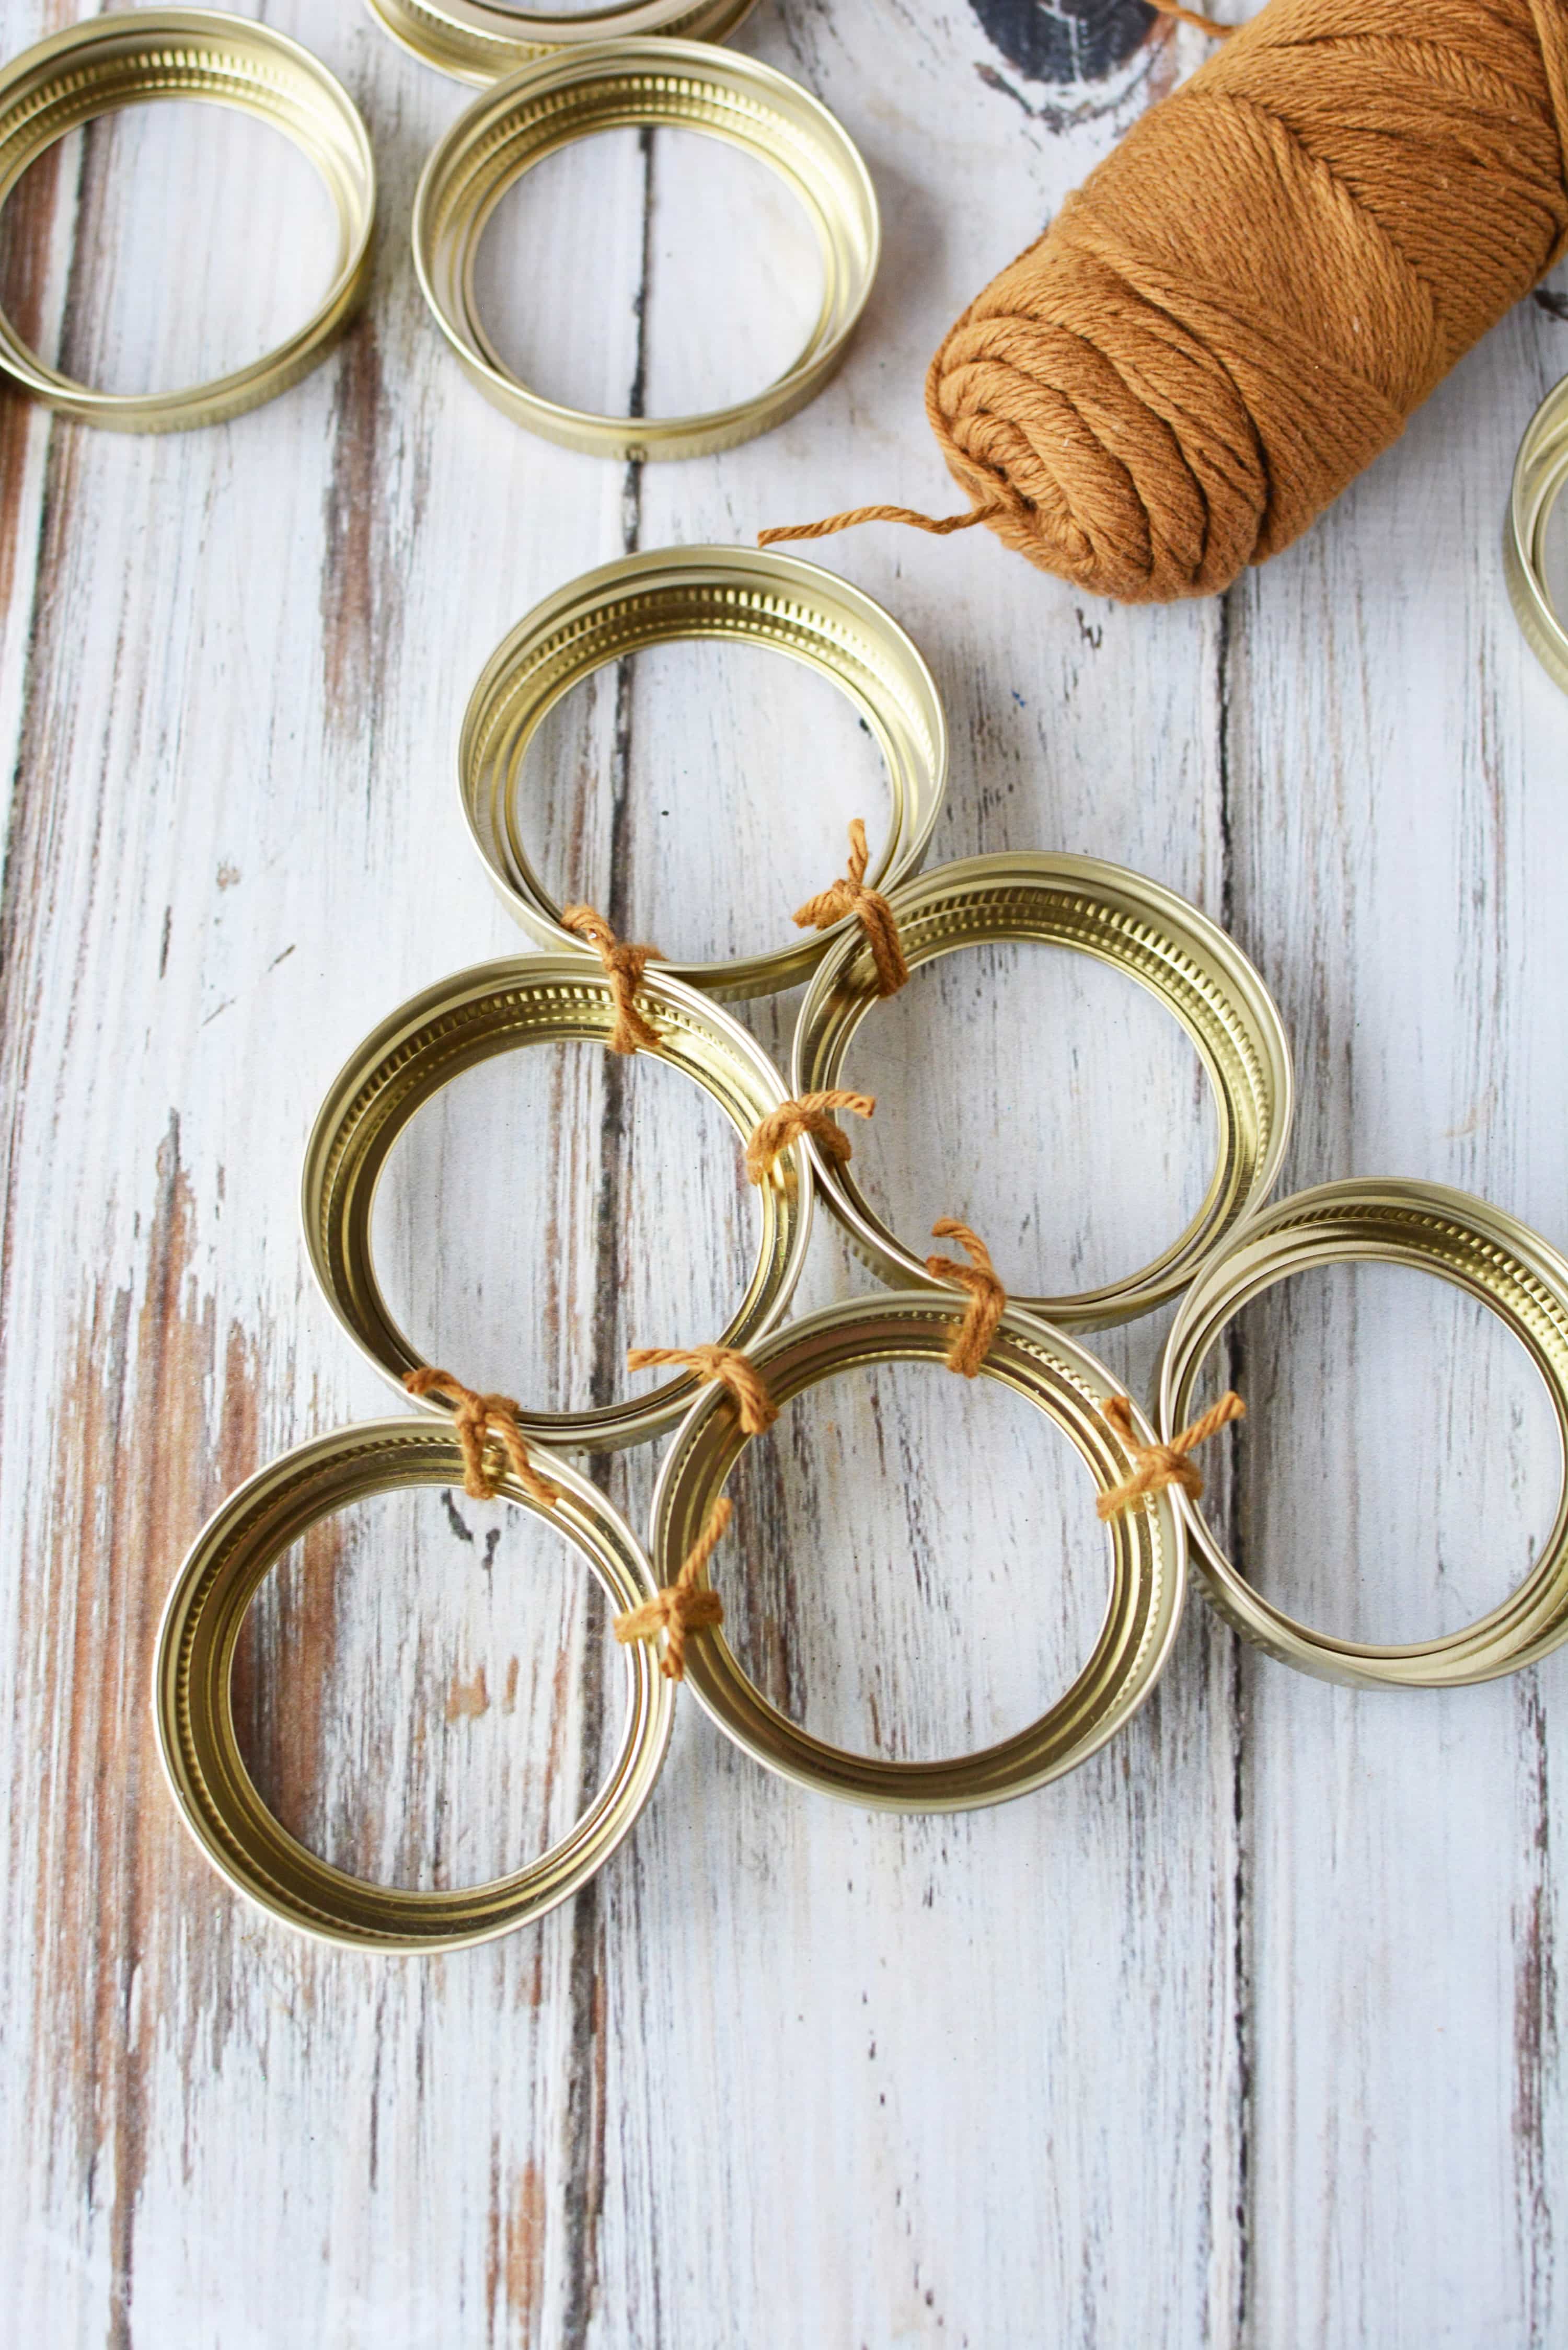 6 mason jar lid rings tied together in a triangle shape with brown yarn to make the shape of a Christmas tree wreath.